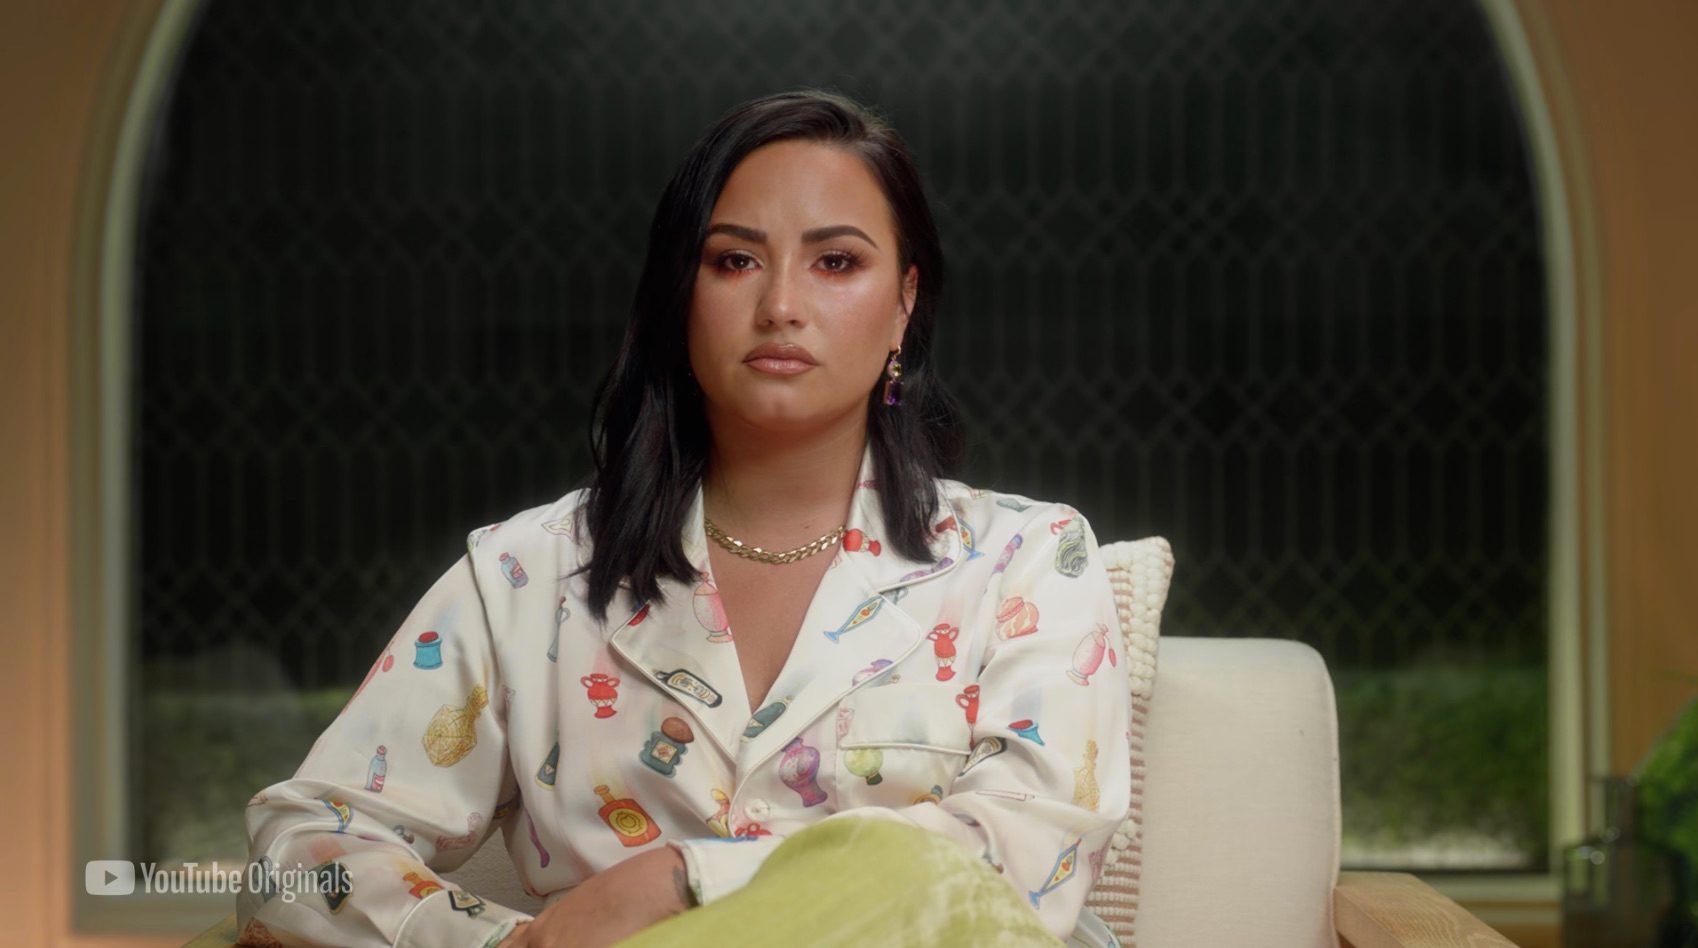 Demi Lovato opens up about being raped as a teen